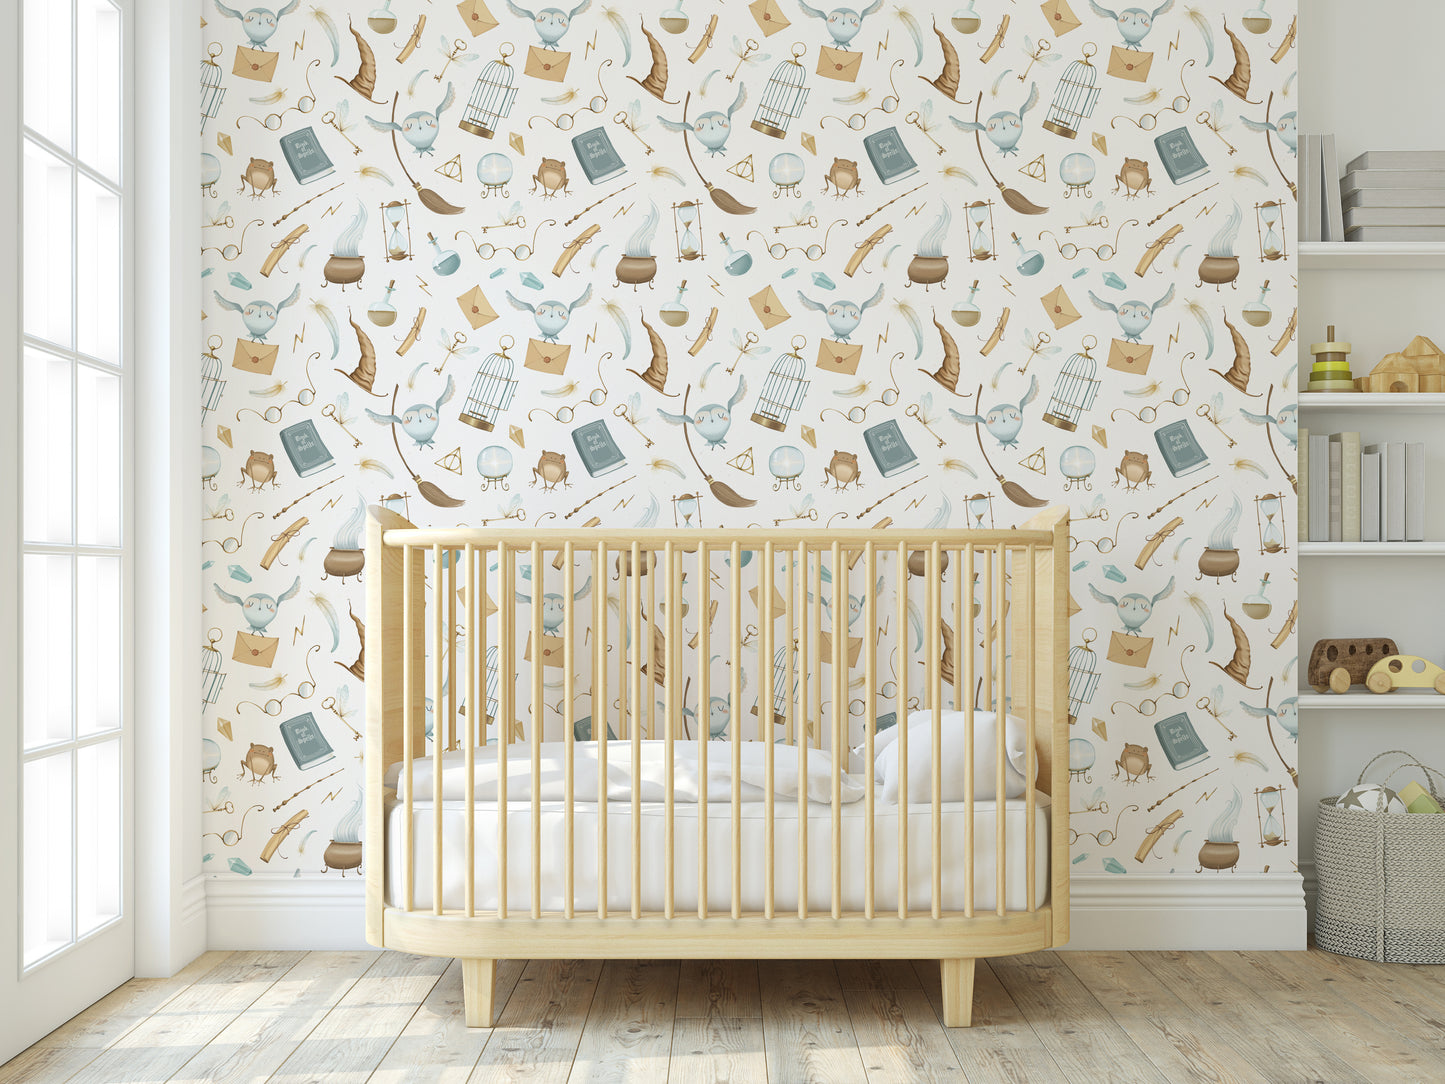 Harry Potter inspired removable peel and stick nursery wallpaper 